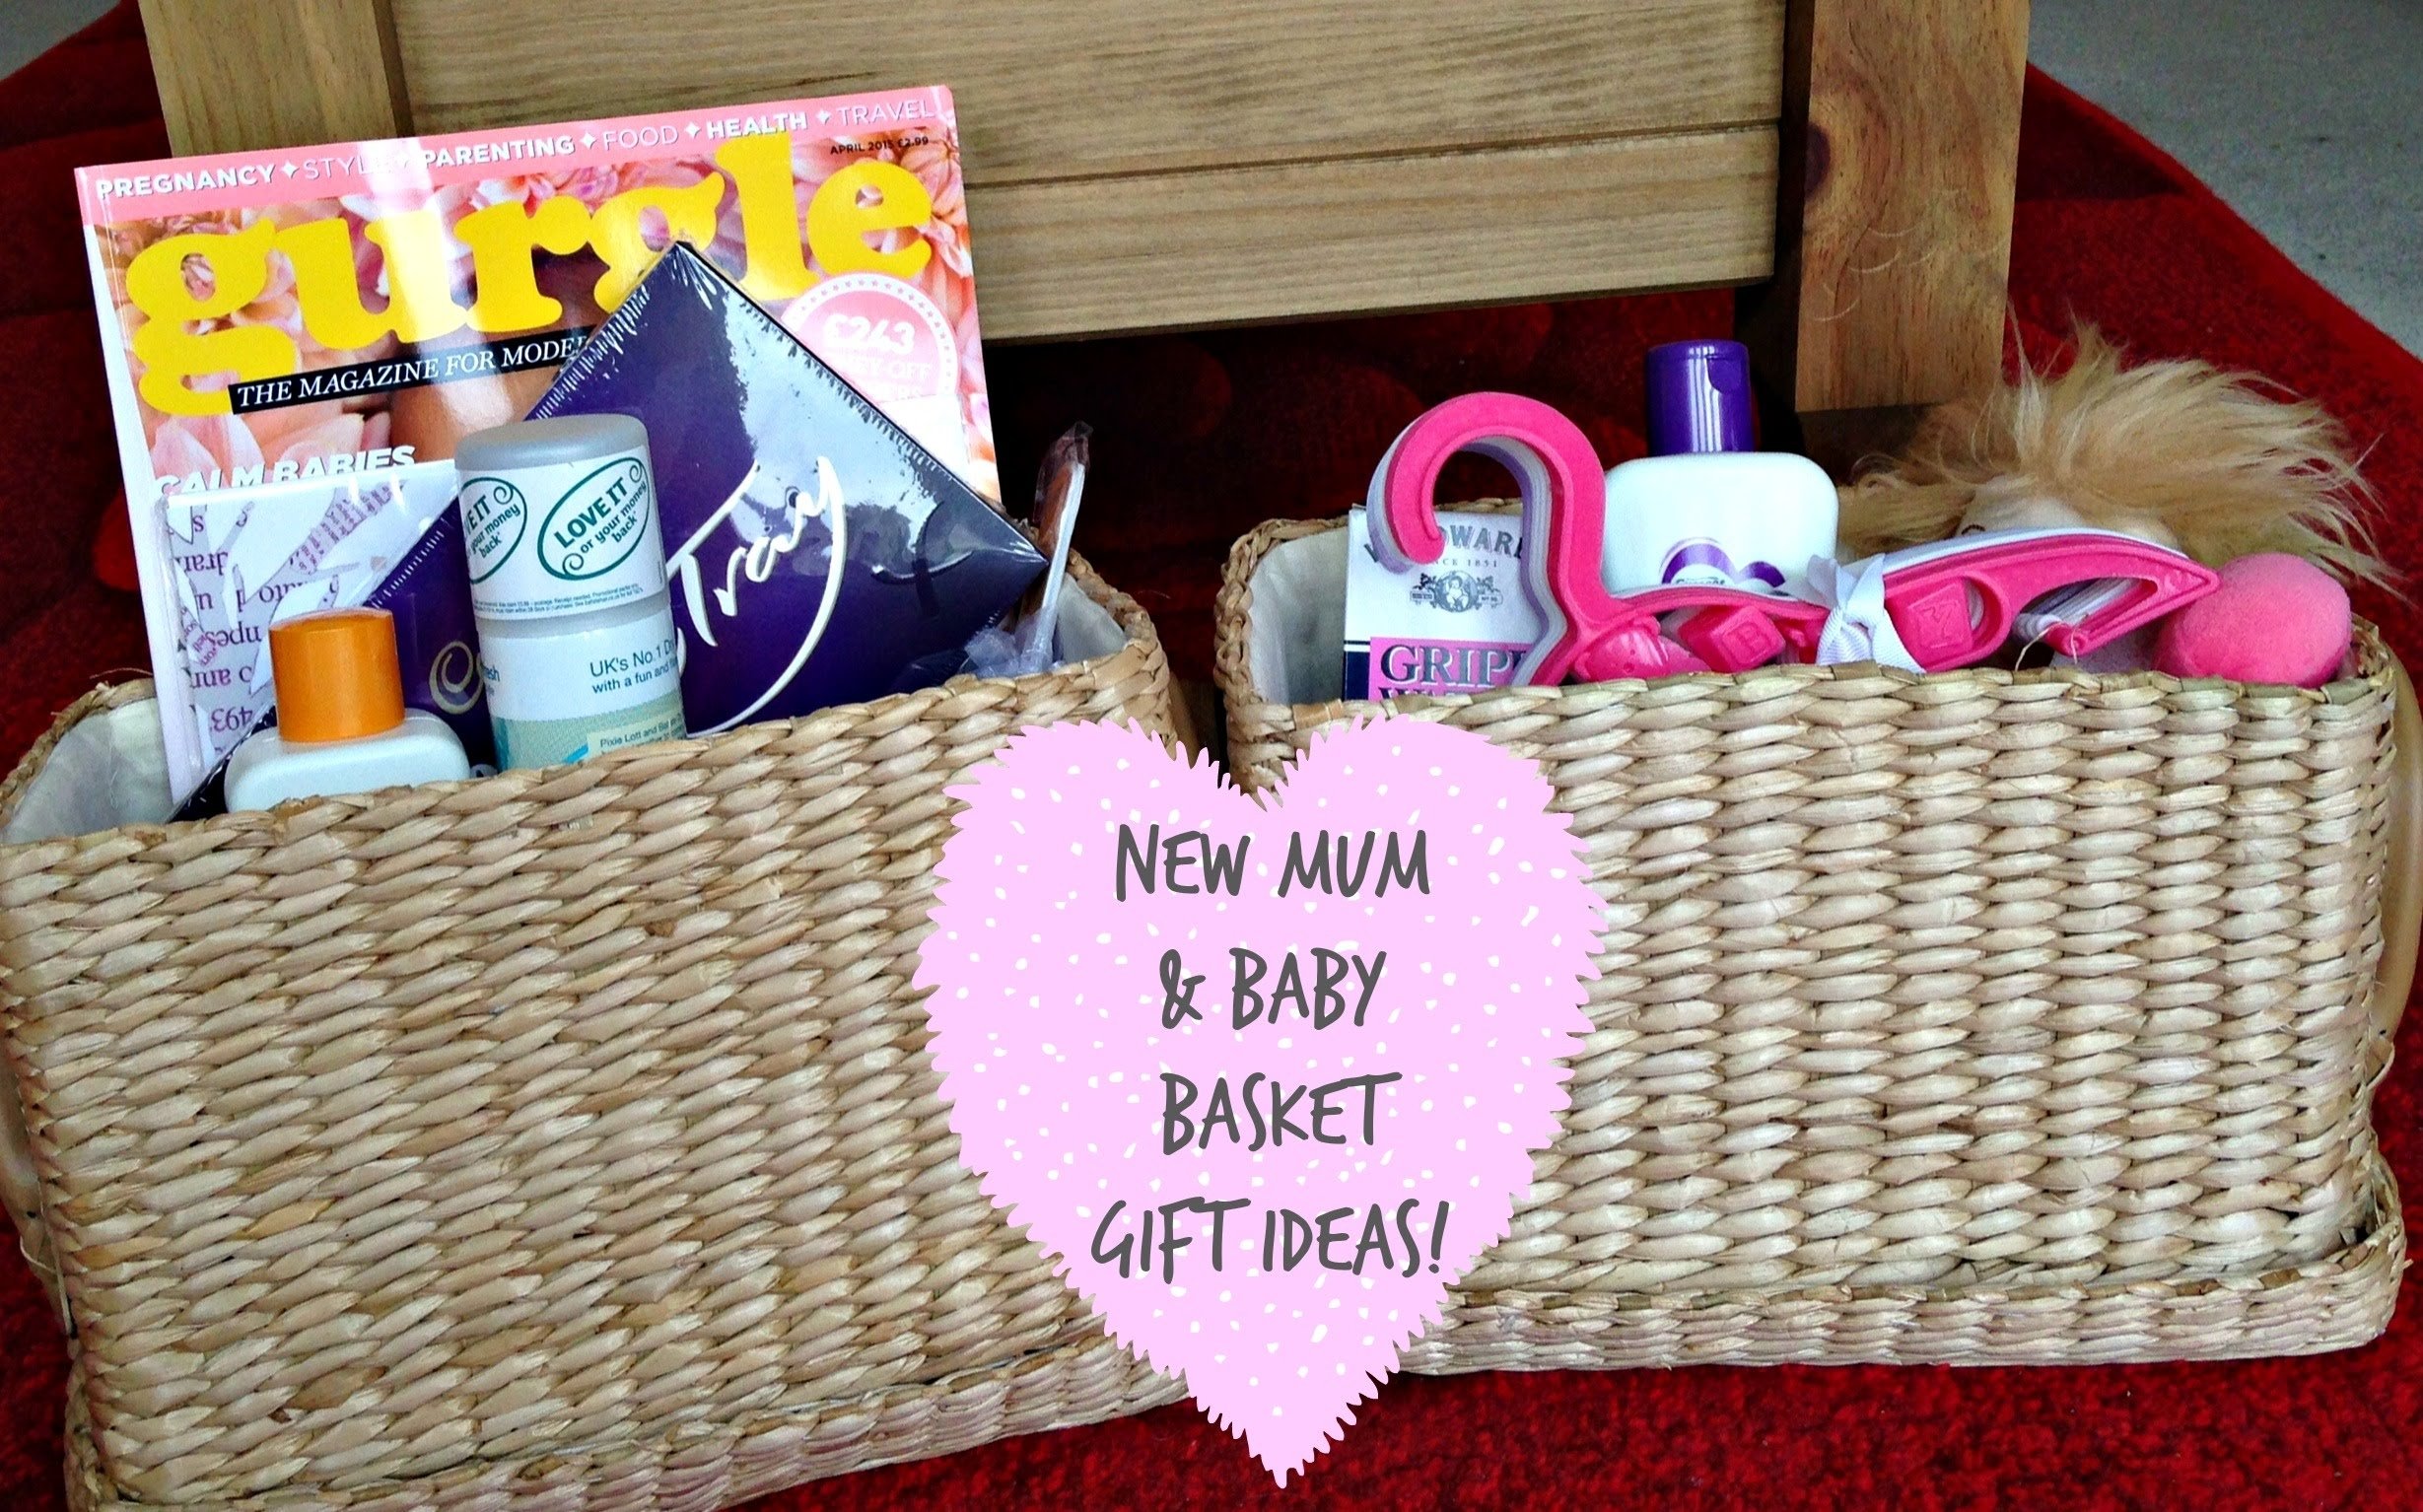 10 Lovable Gift Ideas For New Mom new mum baby basket gift ideas kerry dyer youtube 3 2023